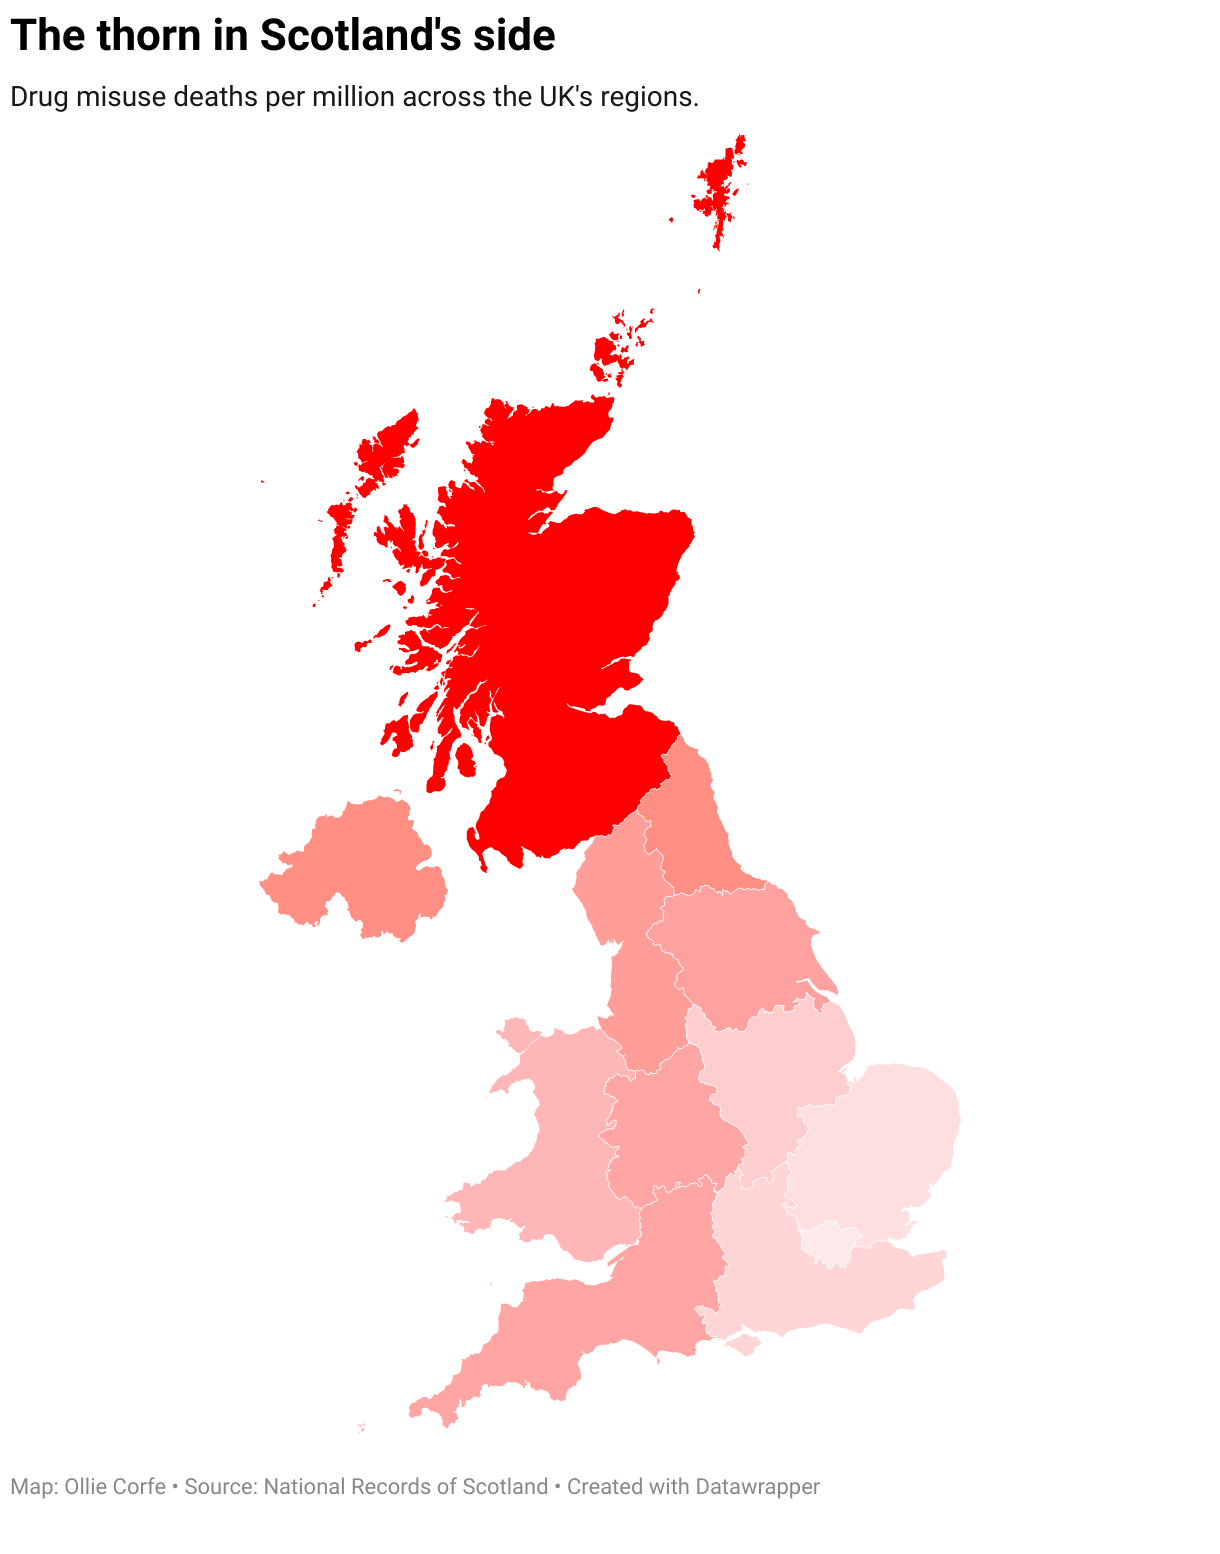 Map of the UK by drug misuse death rates.